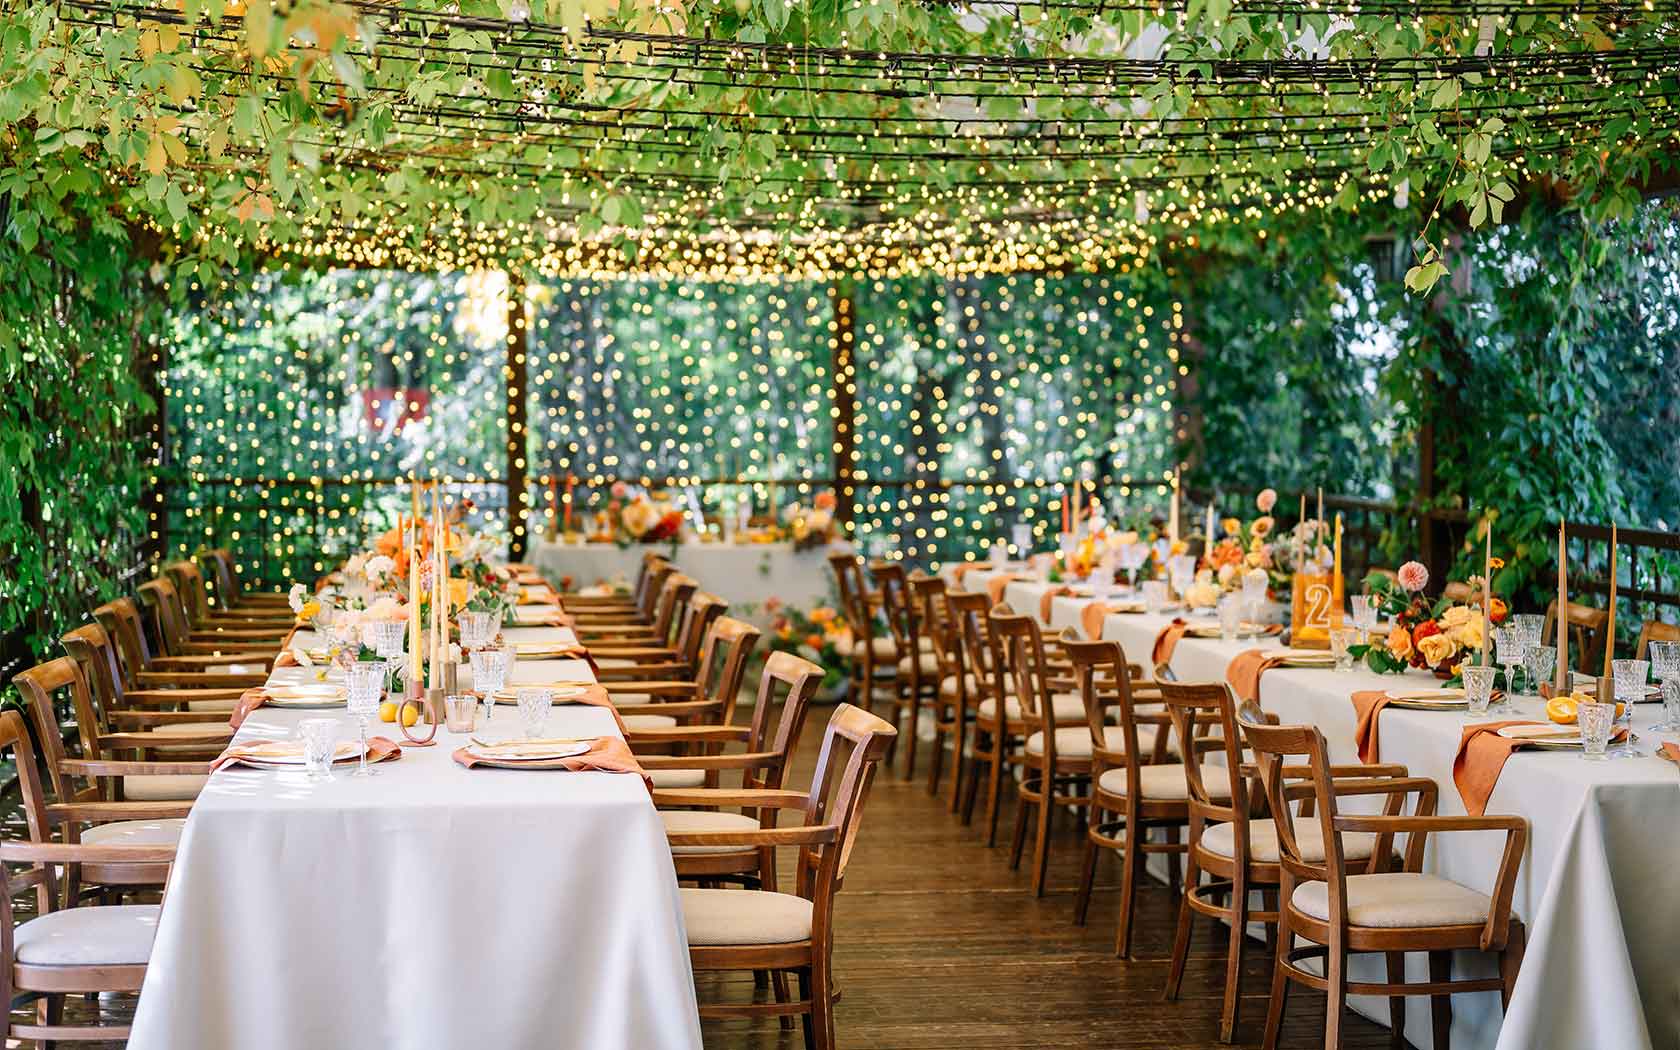 How To Throw A Fall Harvest Themed Brunch Reception